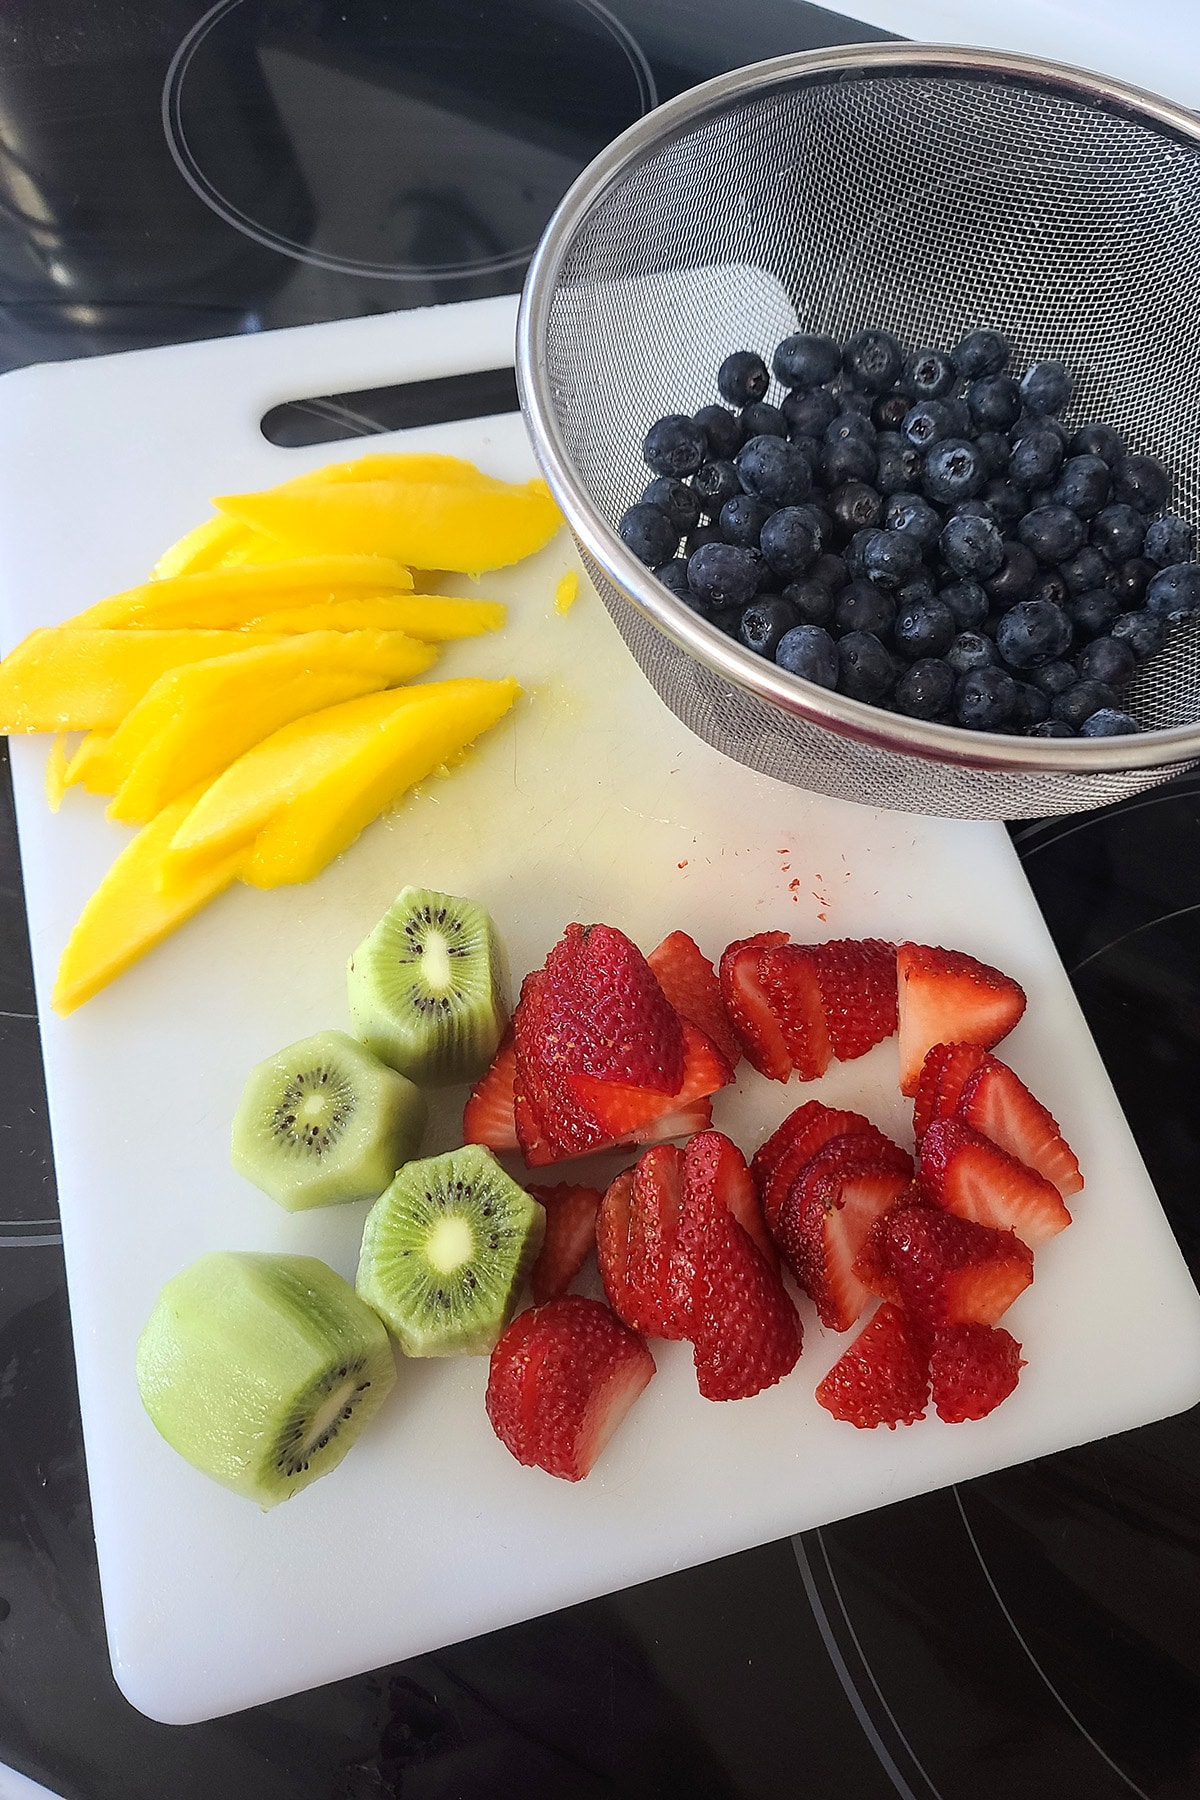 A white cutting board has slices of mango, strawberries, and kiwi fruit, as well as a metal strainer with blueberries in it.